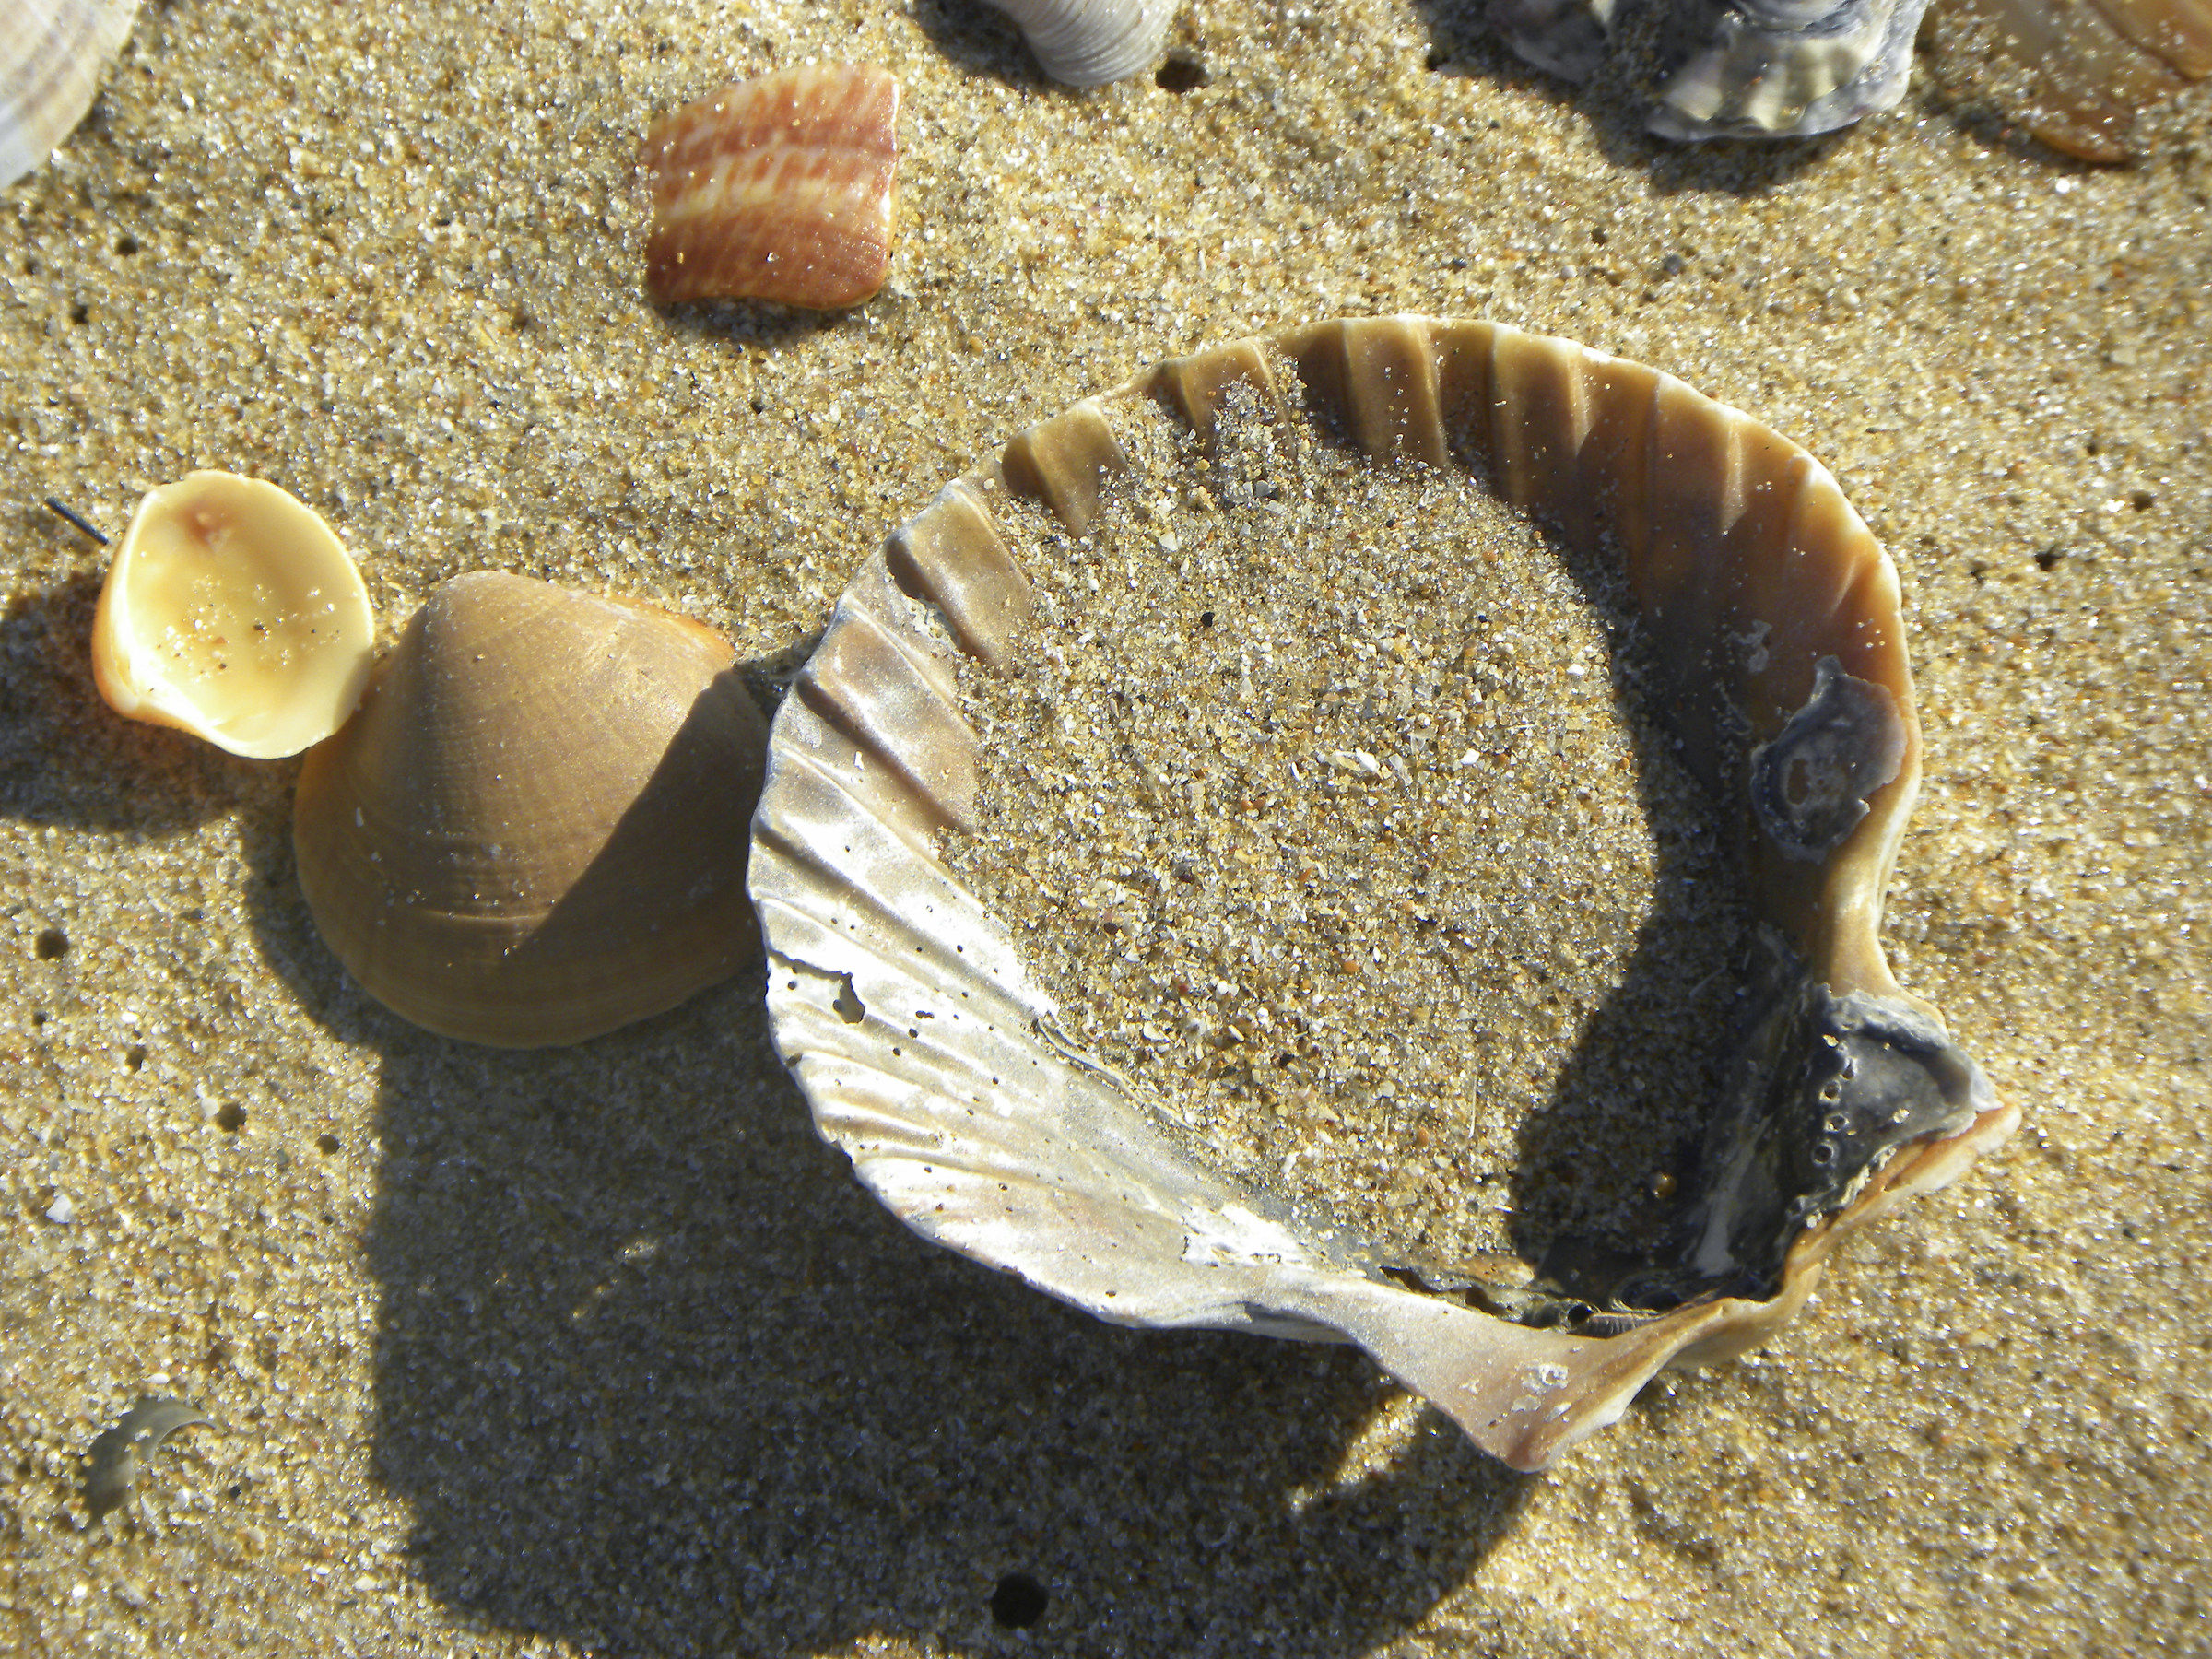 Shells on the beach, met in Andalusia...